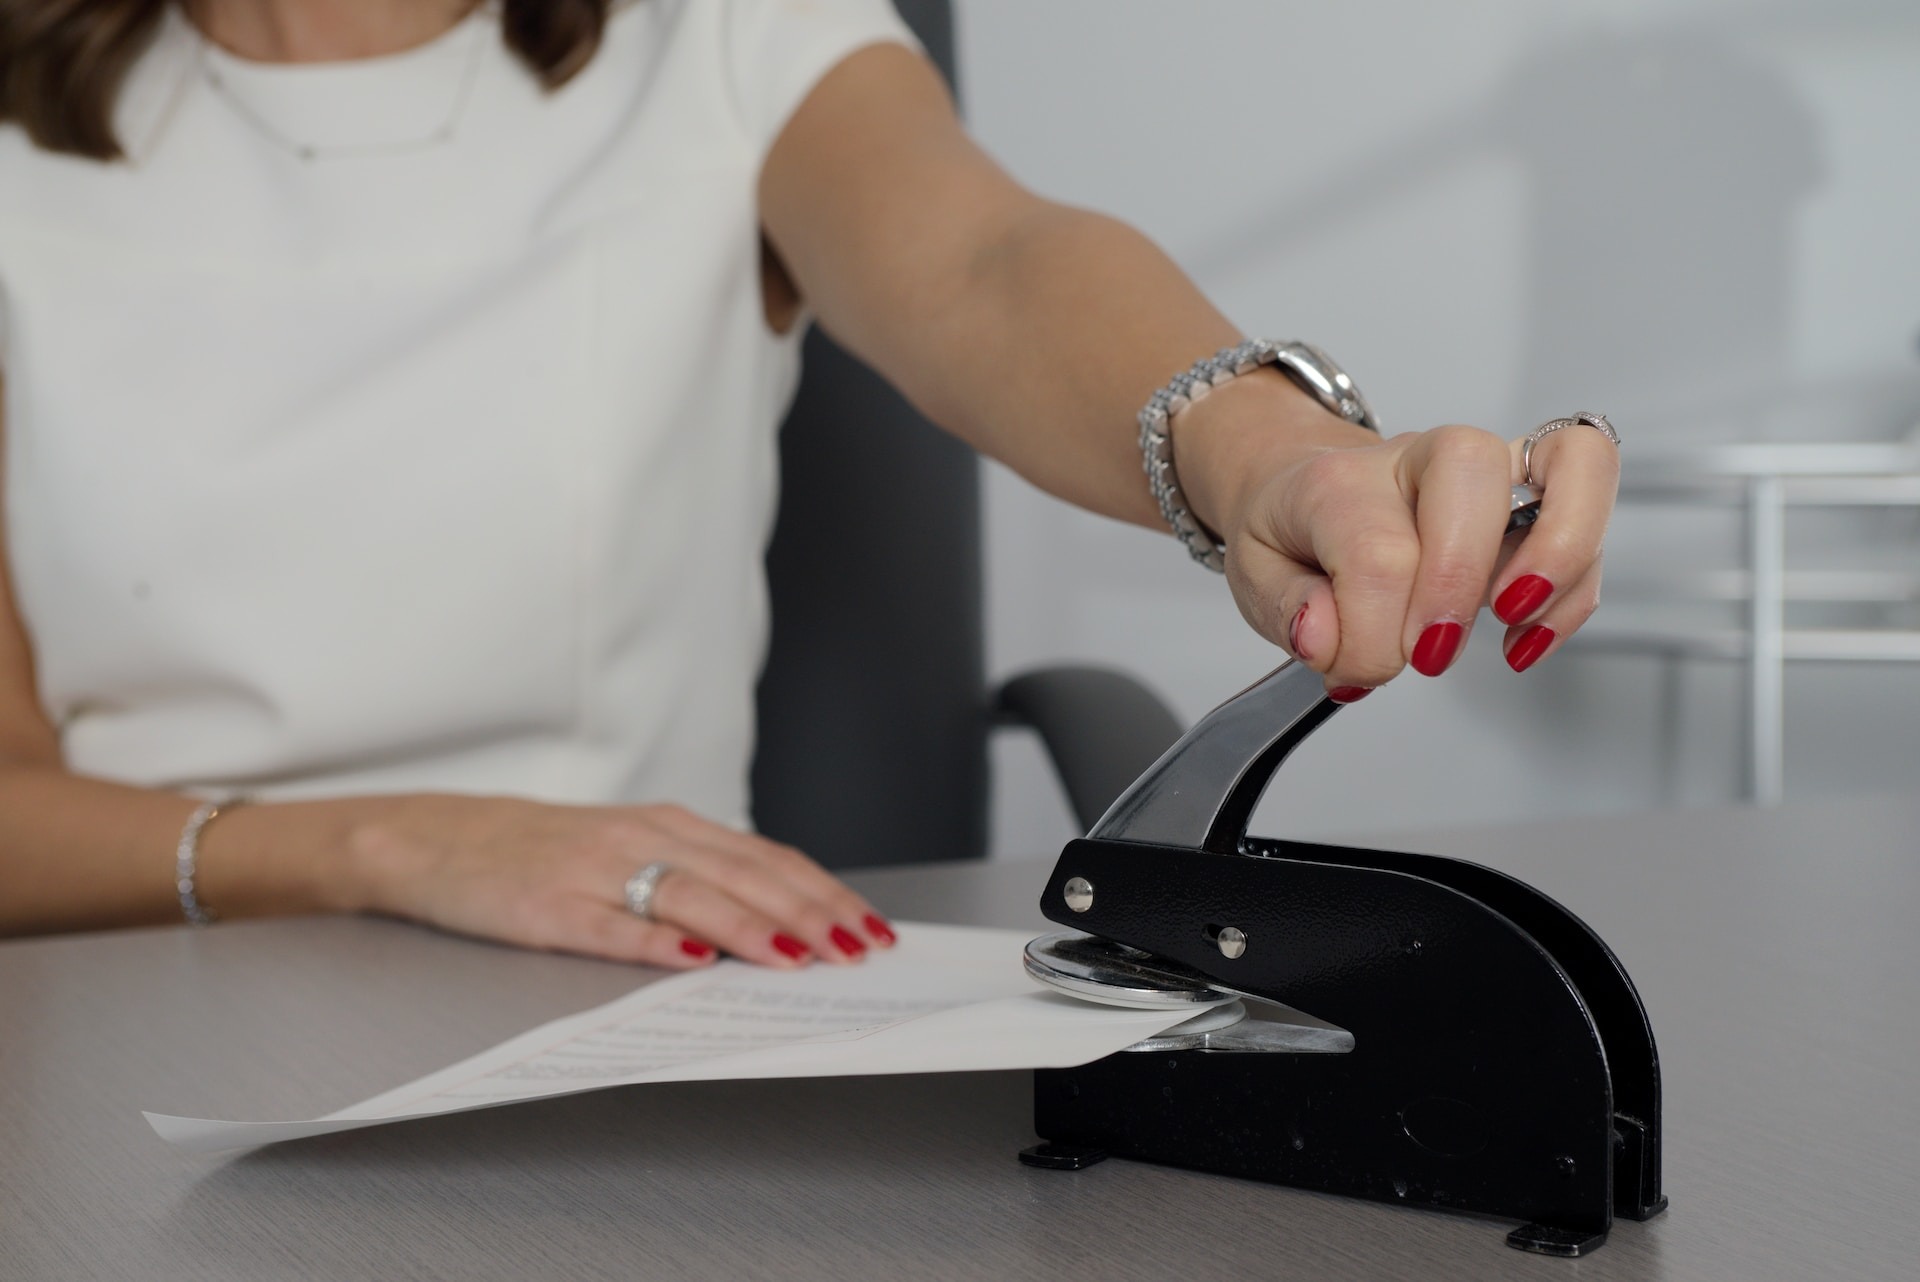 A Notary public is an essential figure when it comes to the authenticity and trust of legal documentation.